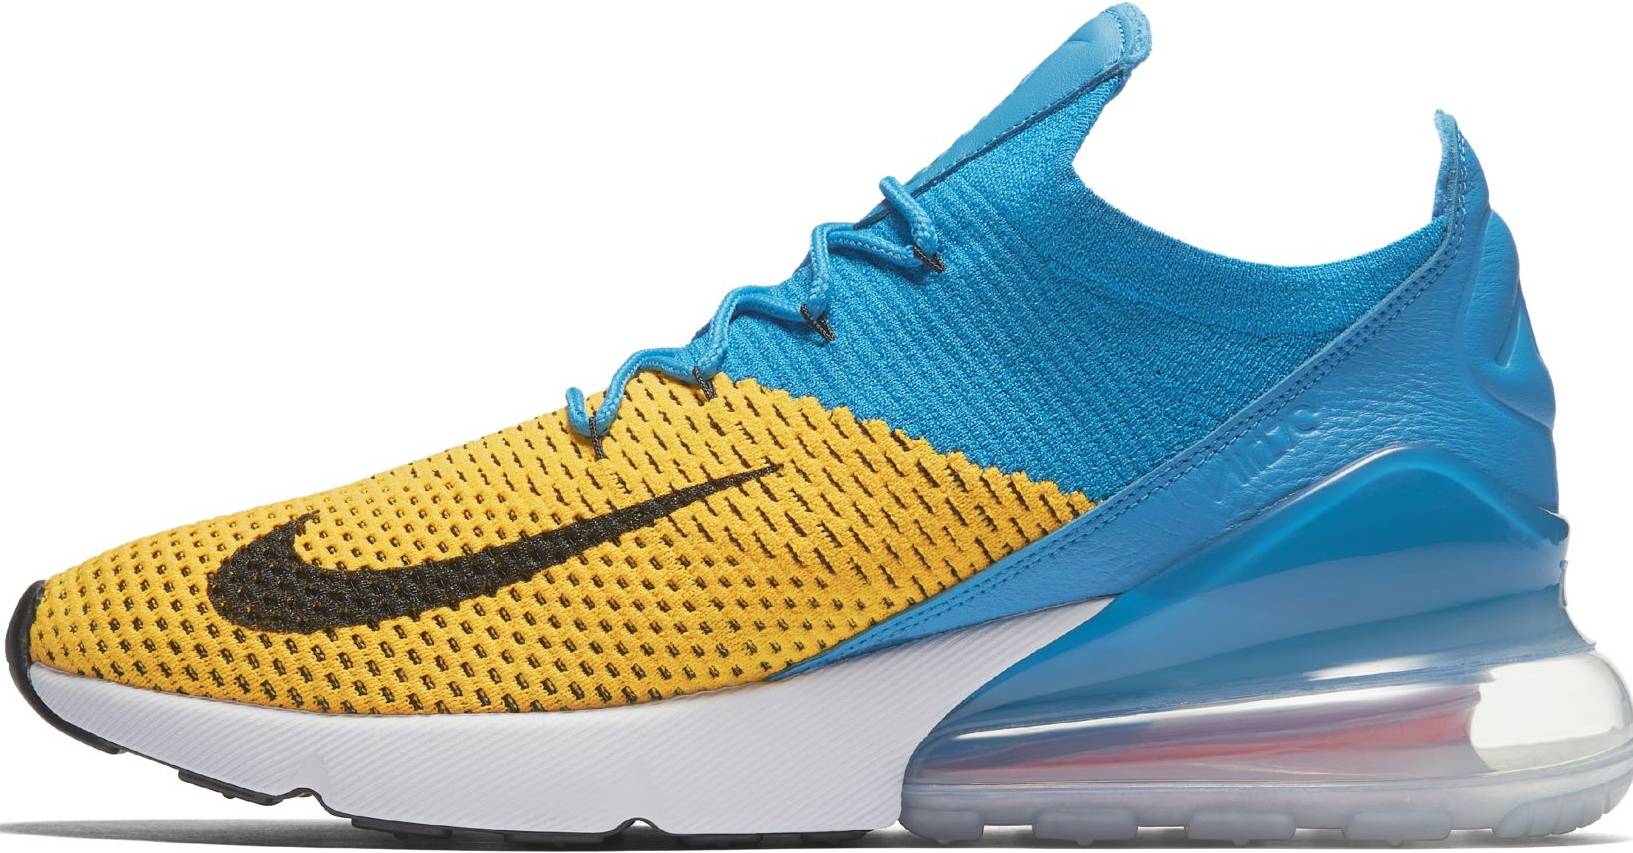 30+ Yellow Nike sneakers: Save up to 23 